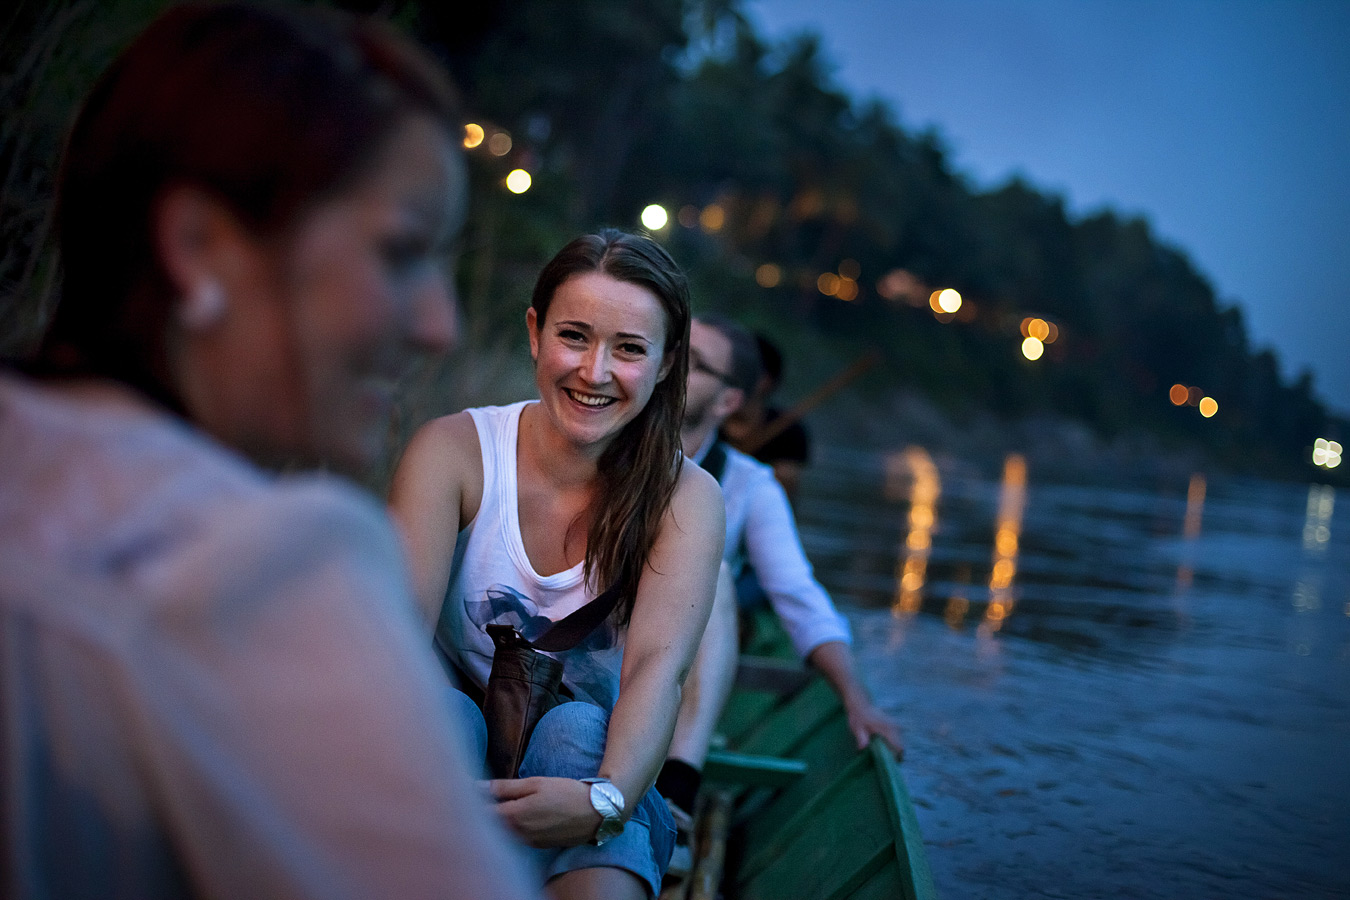 Laos travel photography by Sharon Blance, Melbourne photographer